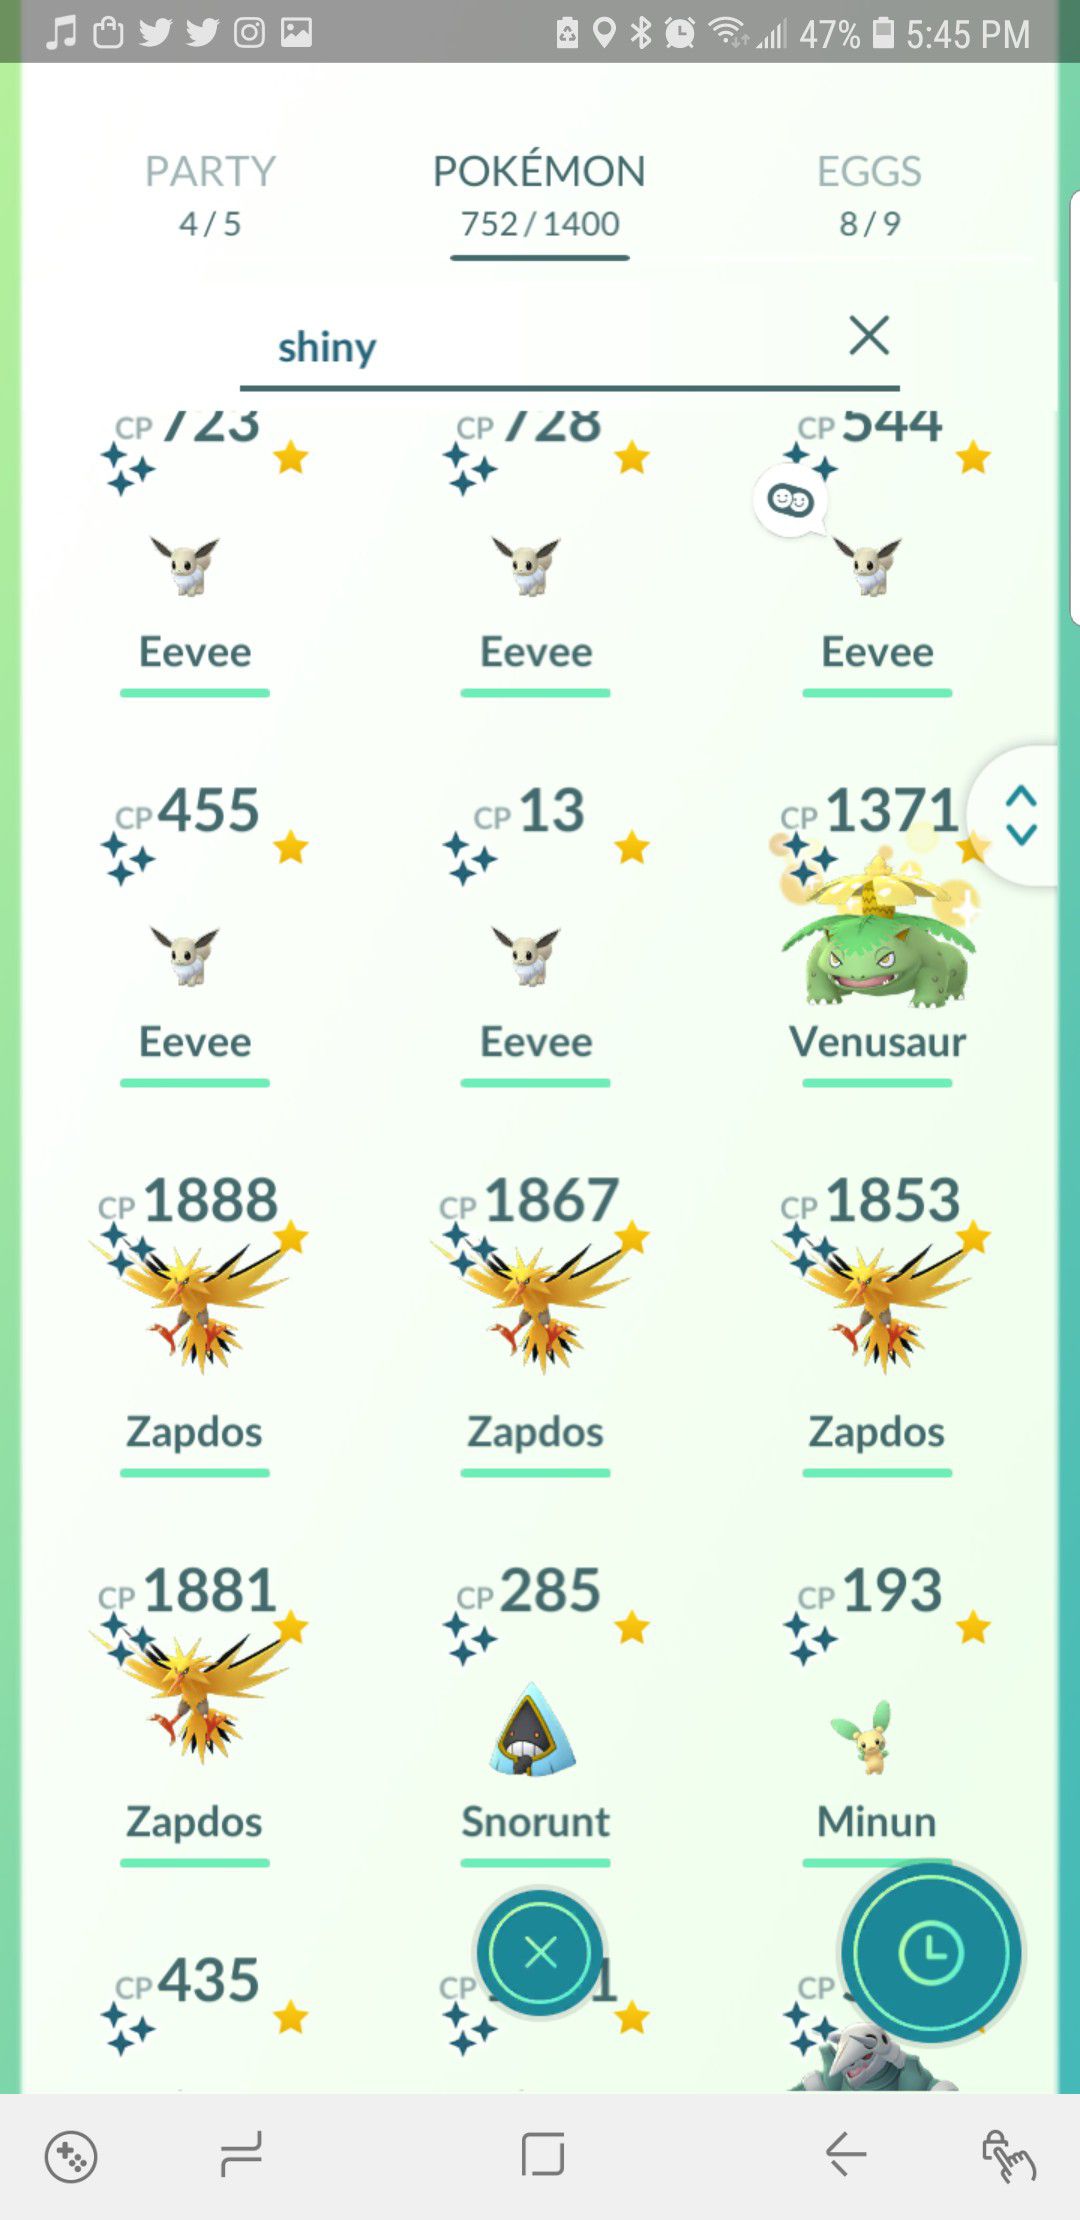 Extremely rare SHINY PARTY HAT Raichu x4 (46 total shinies) level 31 Mystic  Account for Sale in Orlando, FL - OfferUp